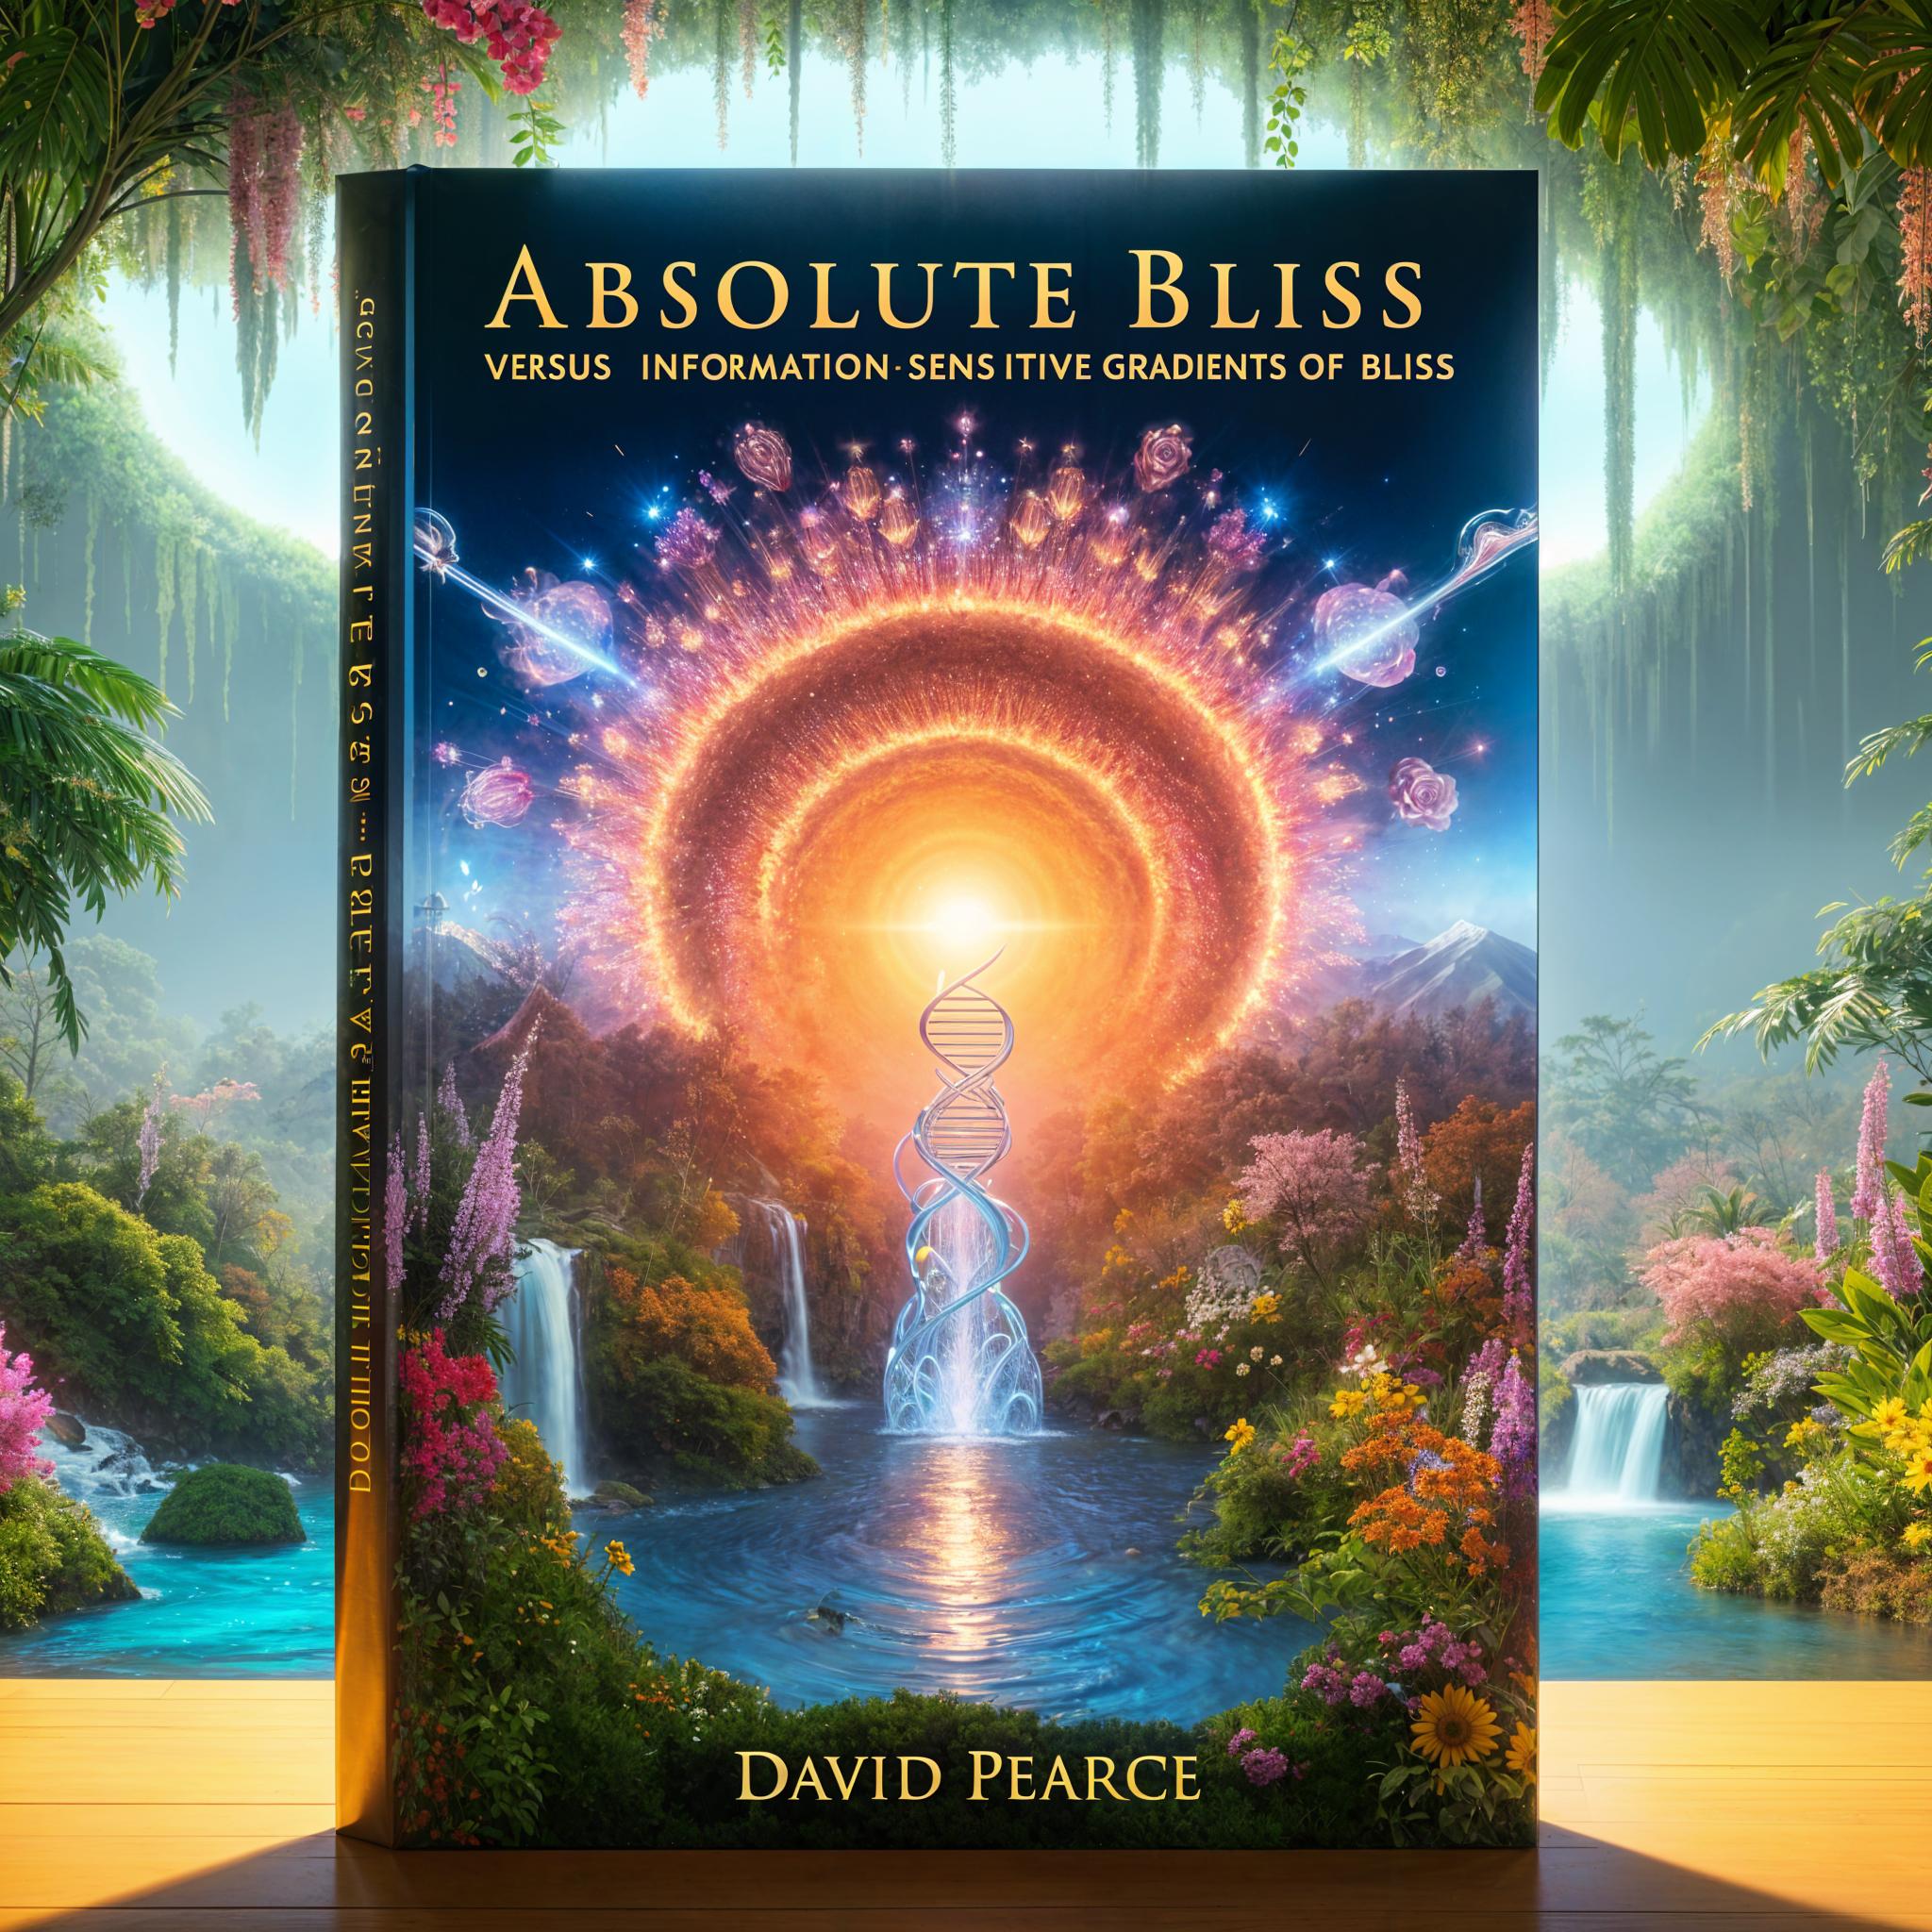 Absolute Bliss versus Information-Sensitive Gradients of Bliss by David Pearce